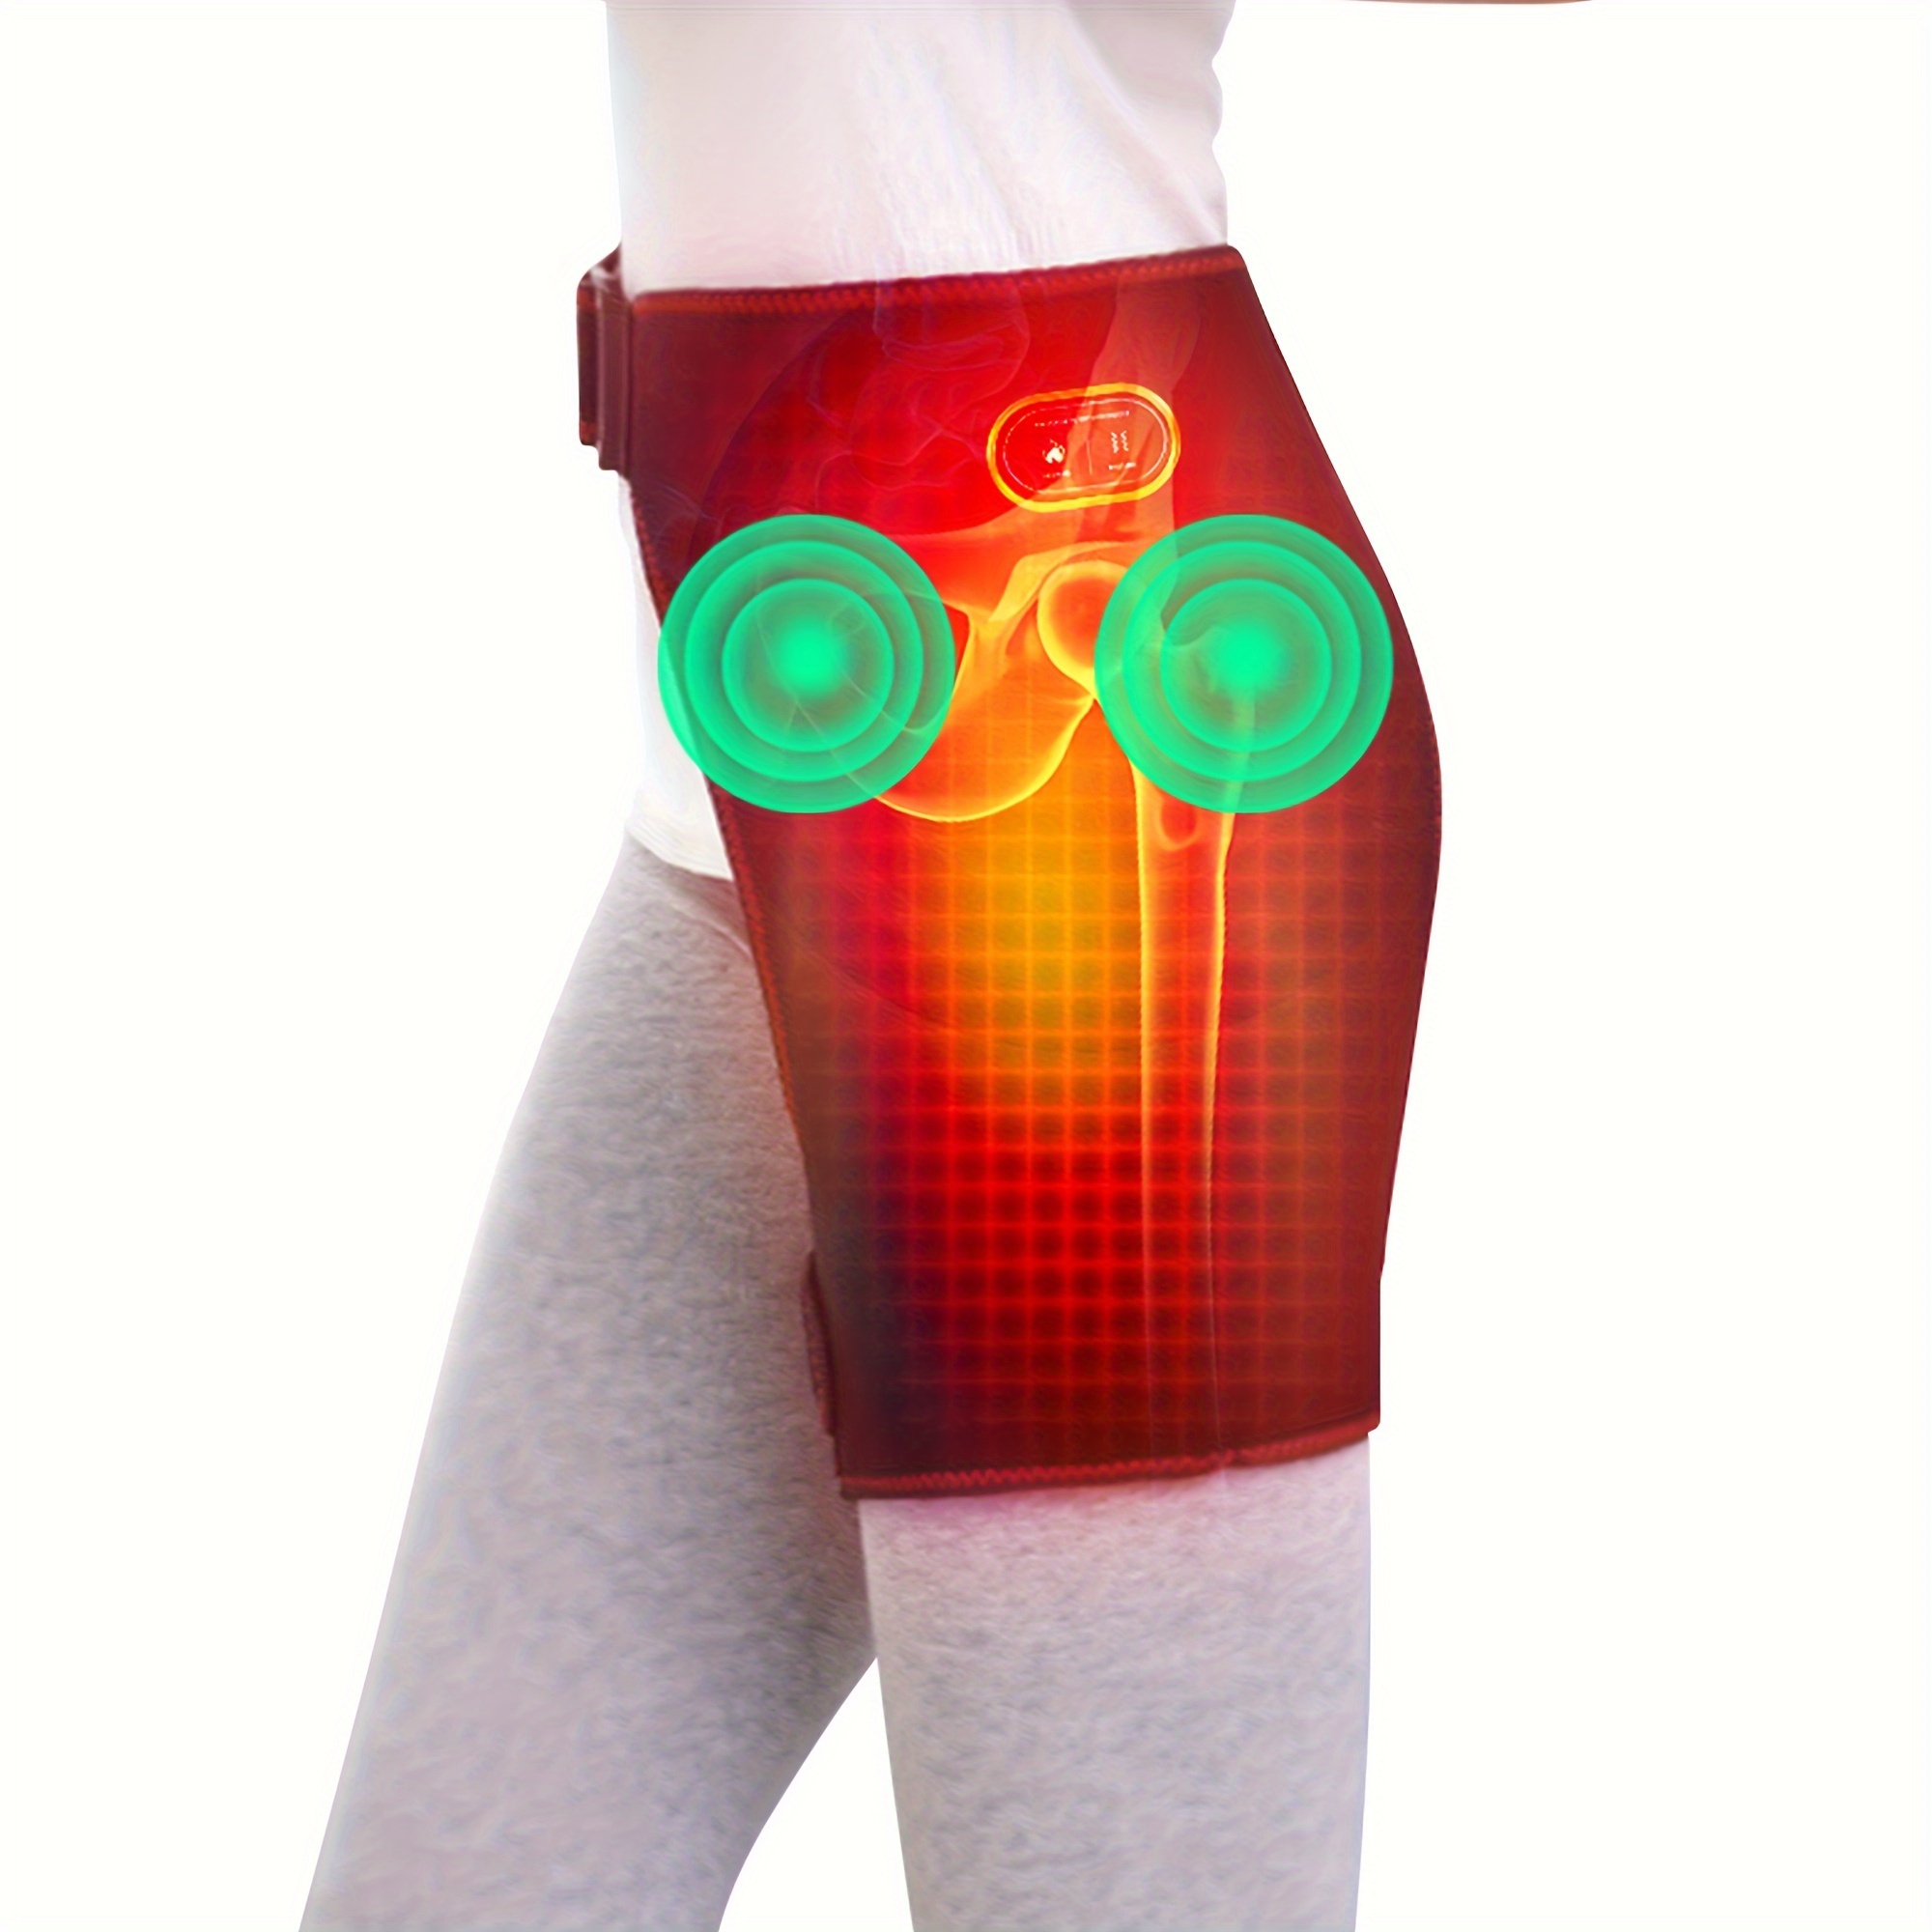 Comfytemp Hip Heating Pad for Hip Pain Relief - Heating Pad for Hip Support  Brace/Sciatica Pain Relief Brace, Lower Back/Thigh/Waist Support Brace